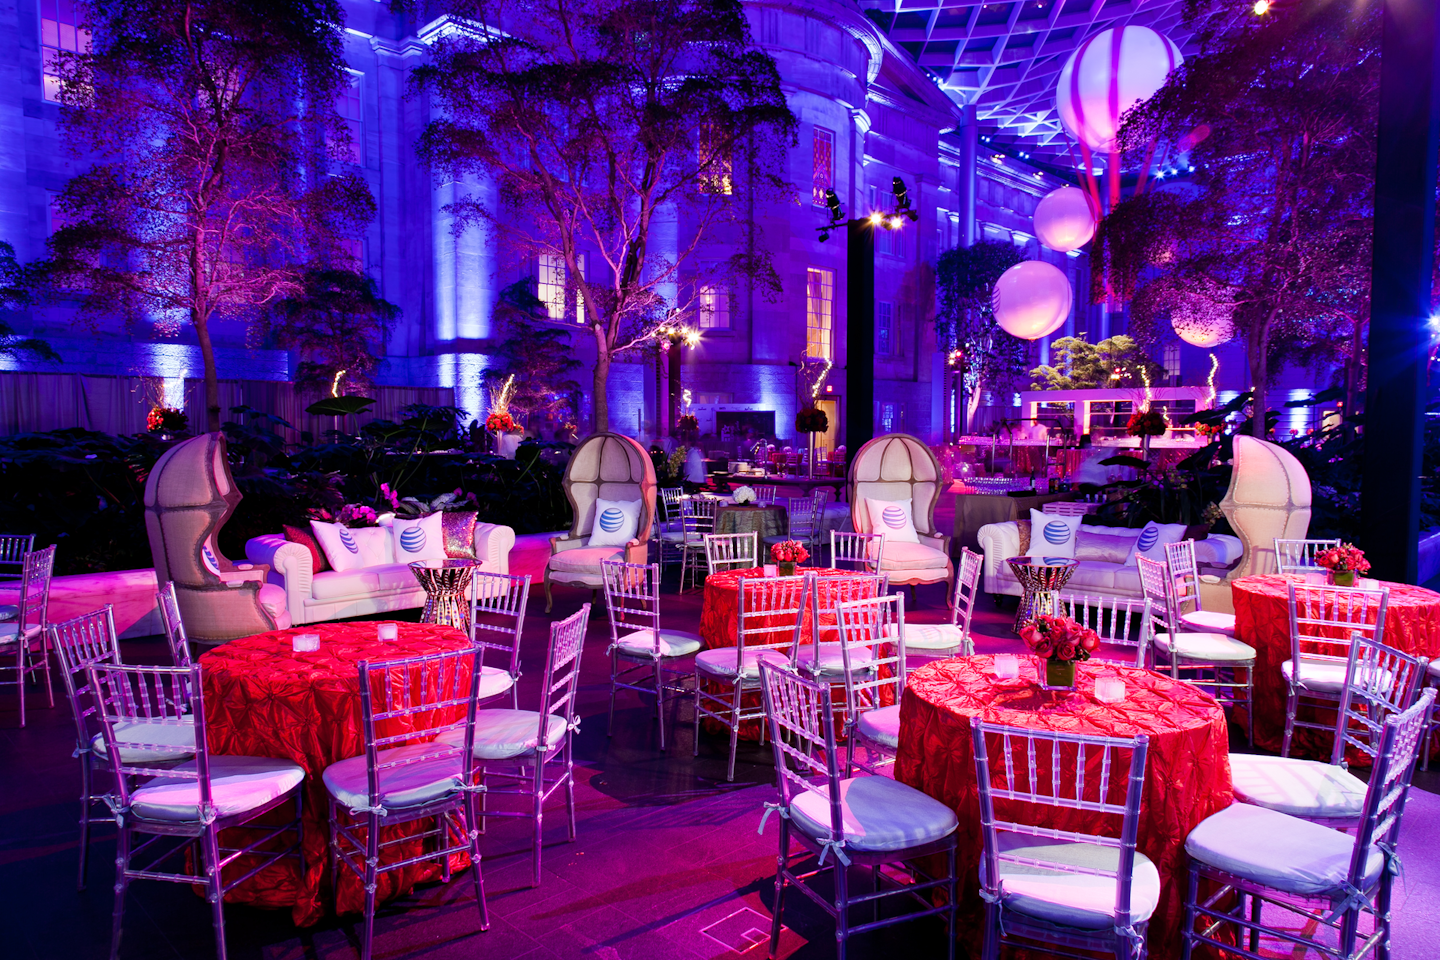 The inauguration balls, like a 2013 event from BET Networks (pictured), are traditionally known for elaborate decor and grandeur. In place of the in-person events, Creative Impact Group’s Joanna Brooks would mail packages to VIPs’ homes that evoke the theme an in-person ball would have had, such as Texas barbecue for a Texas-hosted ball.